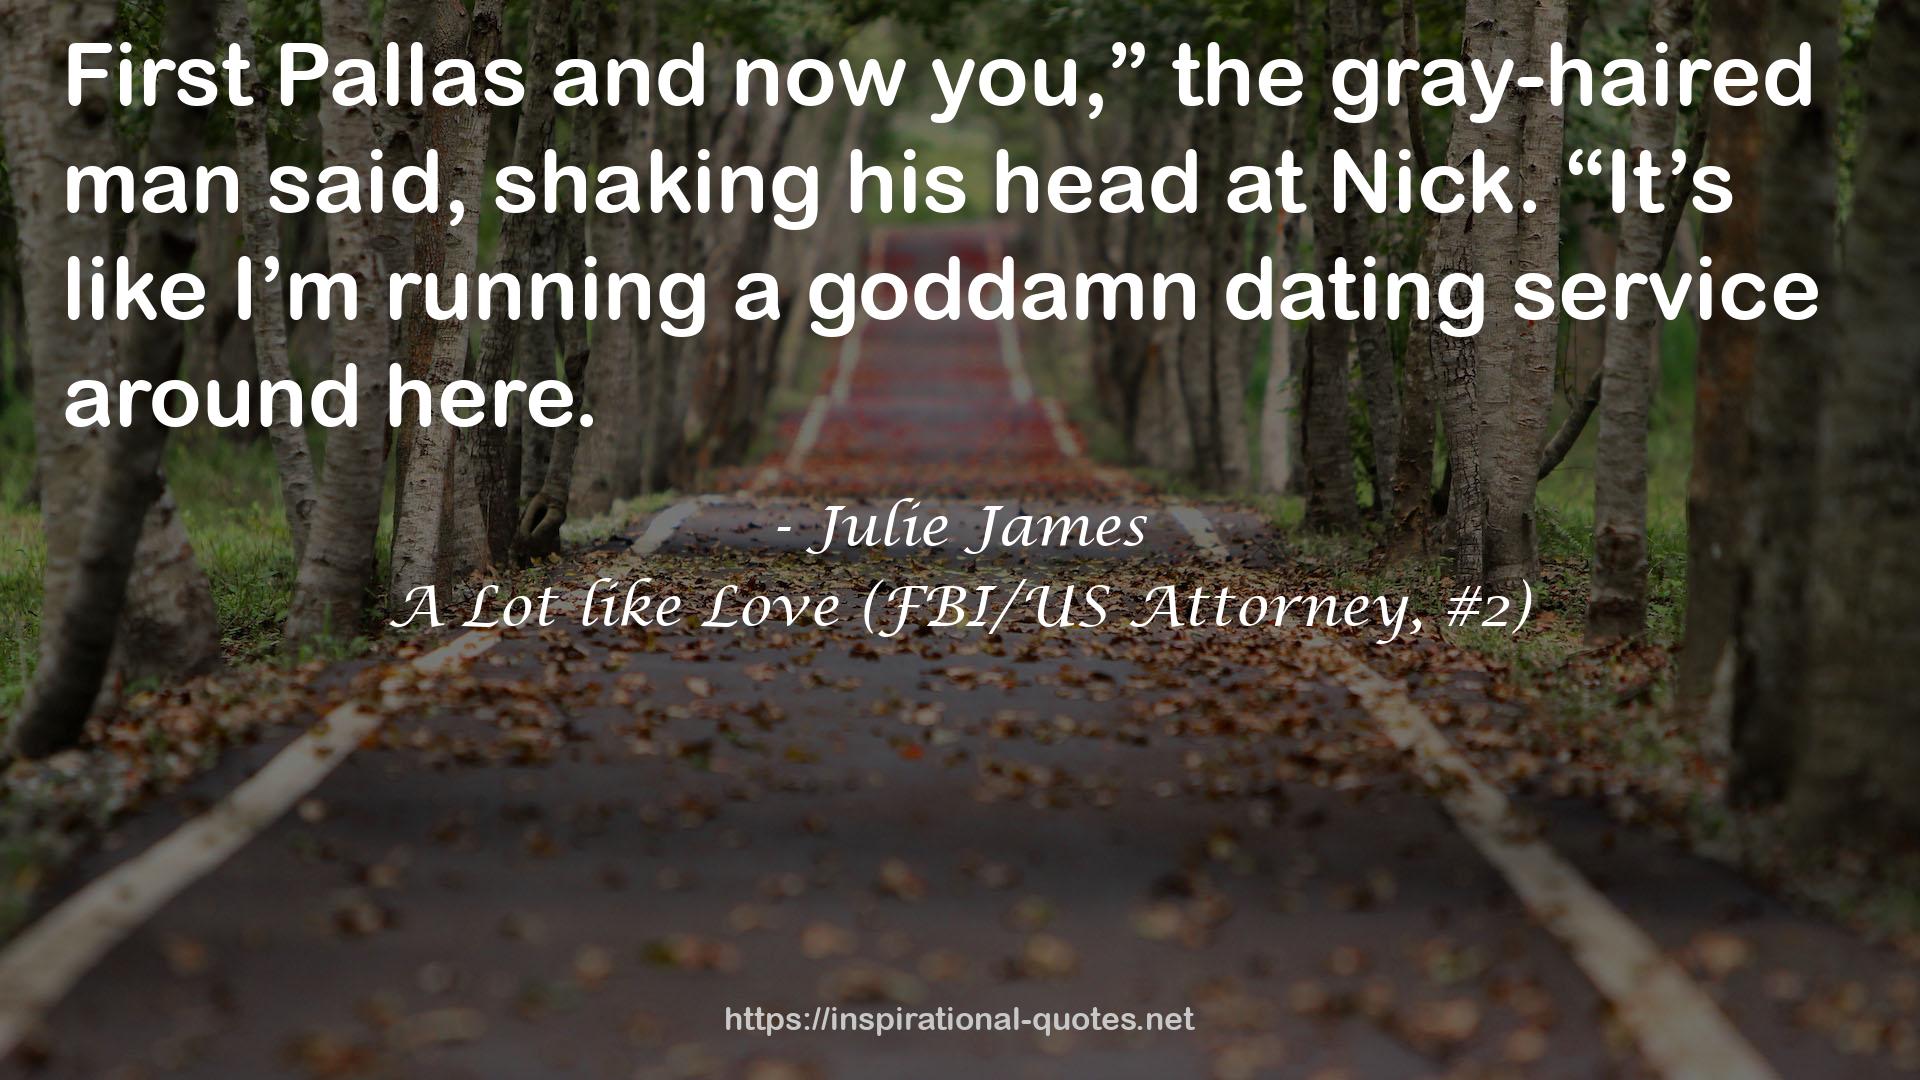 A Lot like Love (FBI/US Attorney, #2) QUOTES